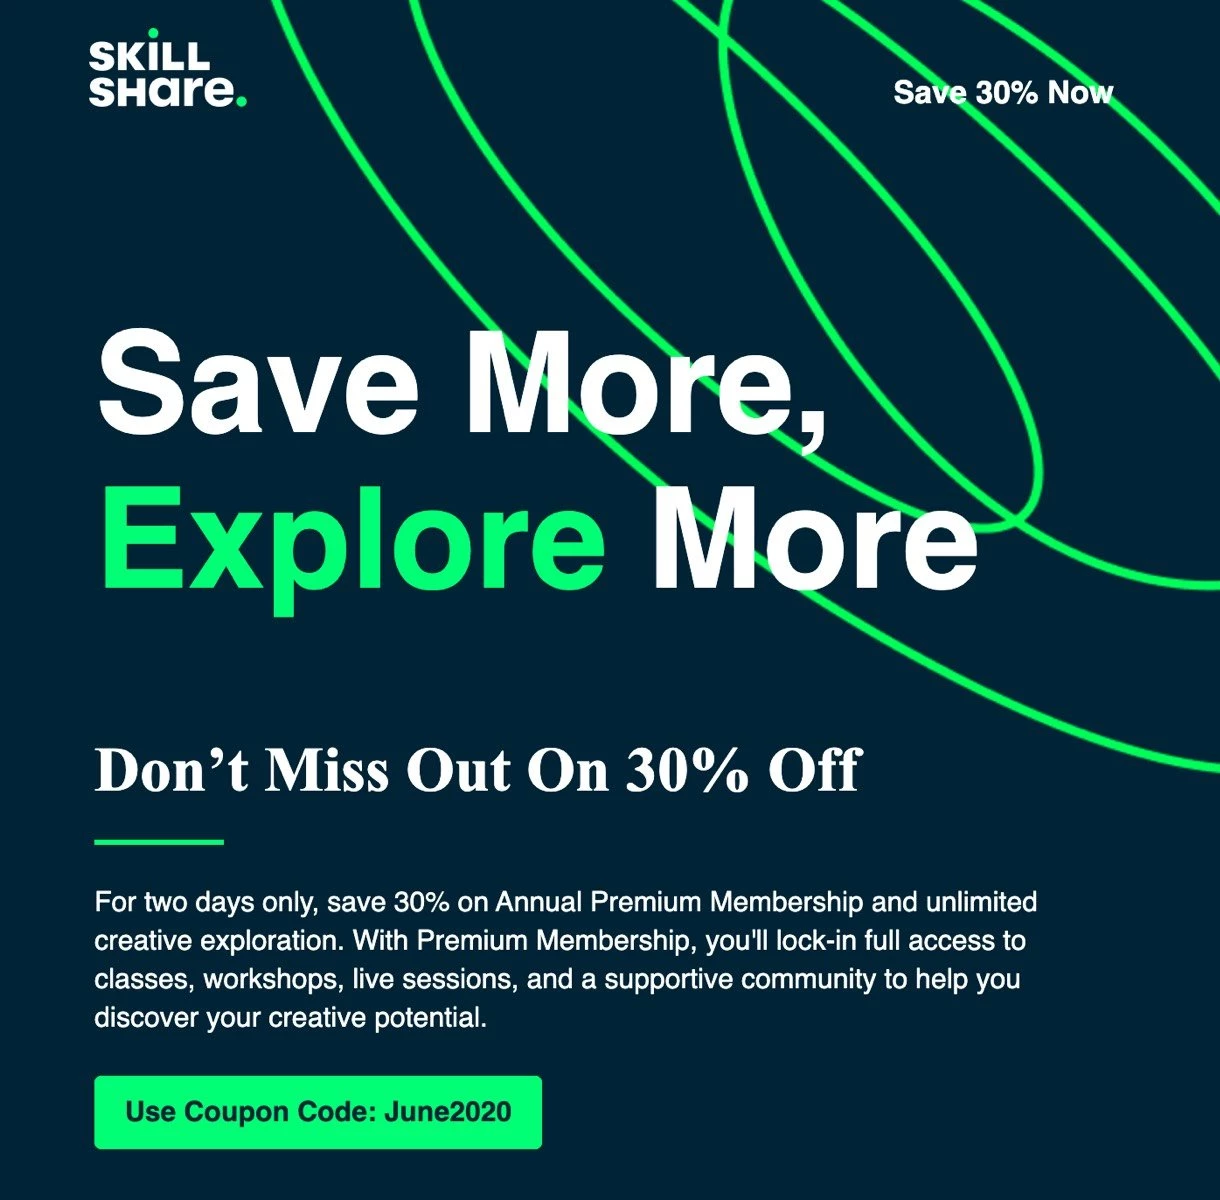 Best Buy Email Newsletters: Shop Sales, Discounts, and Coupon Codes